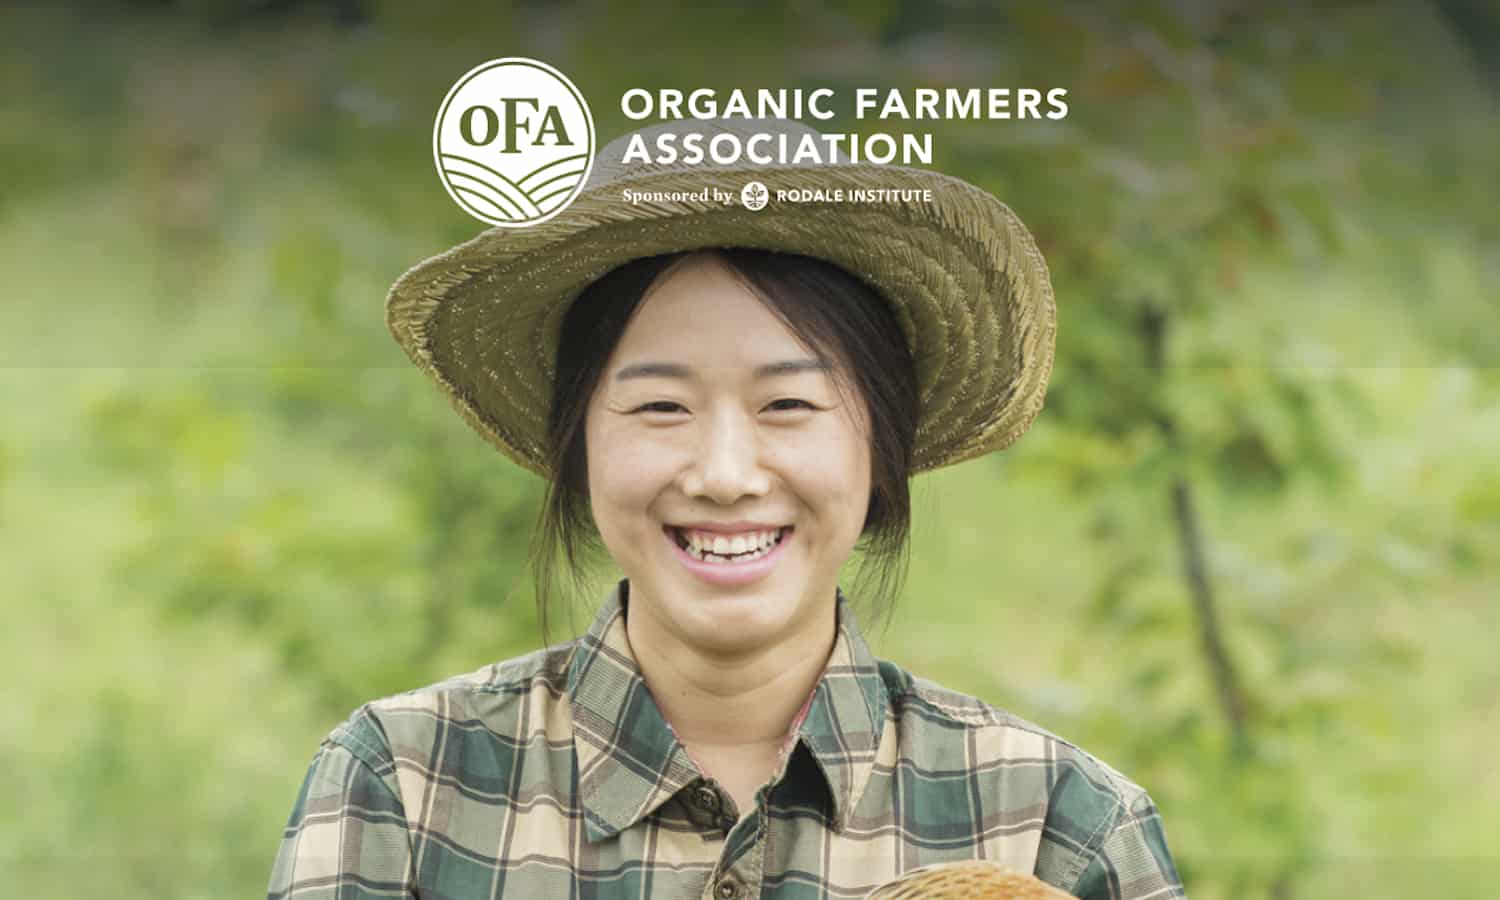 Kate Mendenhall, Director of the Organic Farmers Association with extensive advocacy and farming experience, discusses the needs and wants of organic farmers.